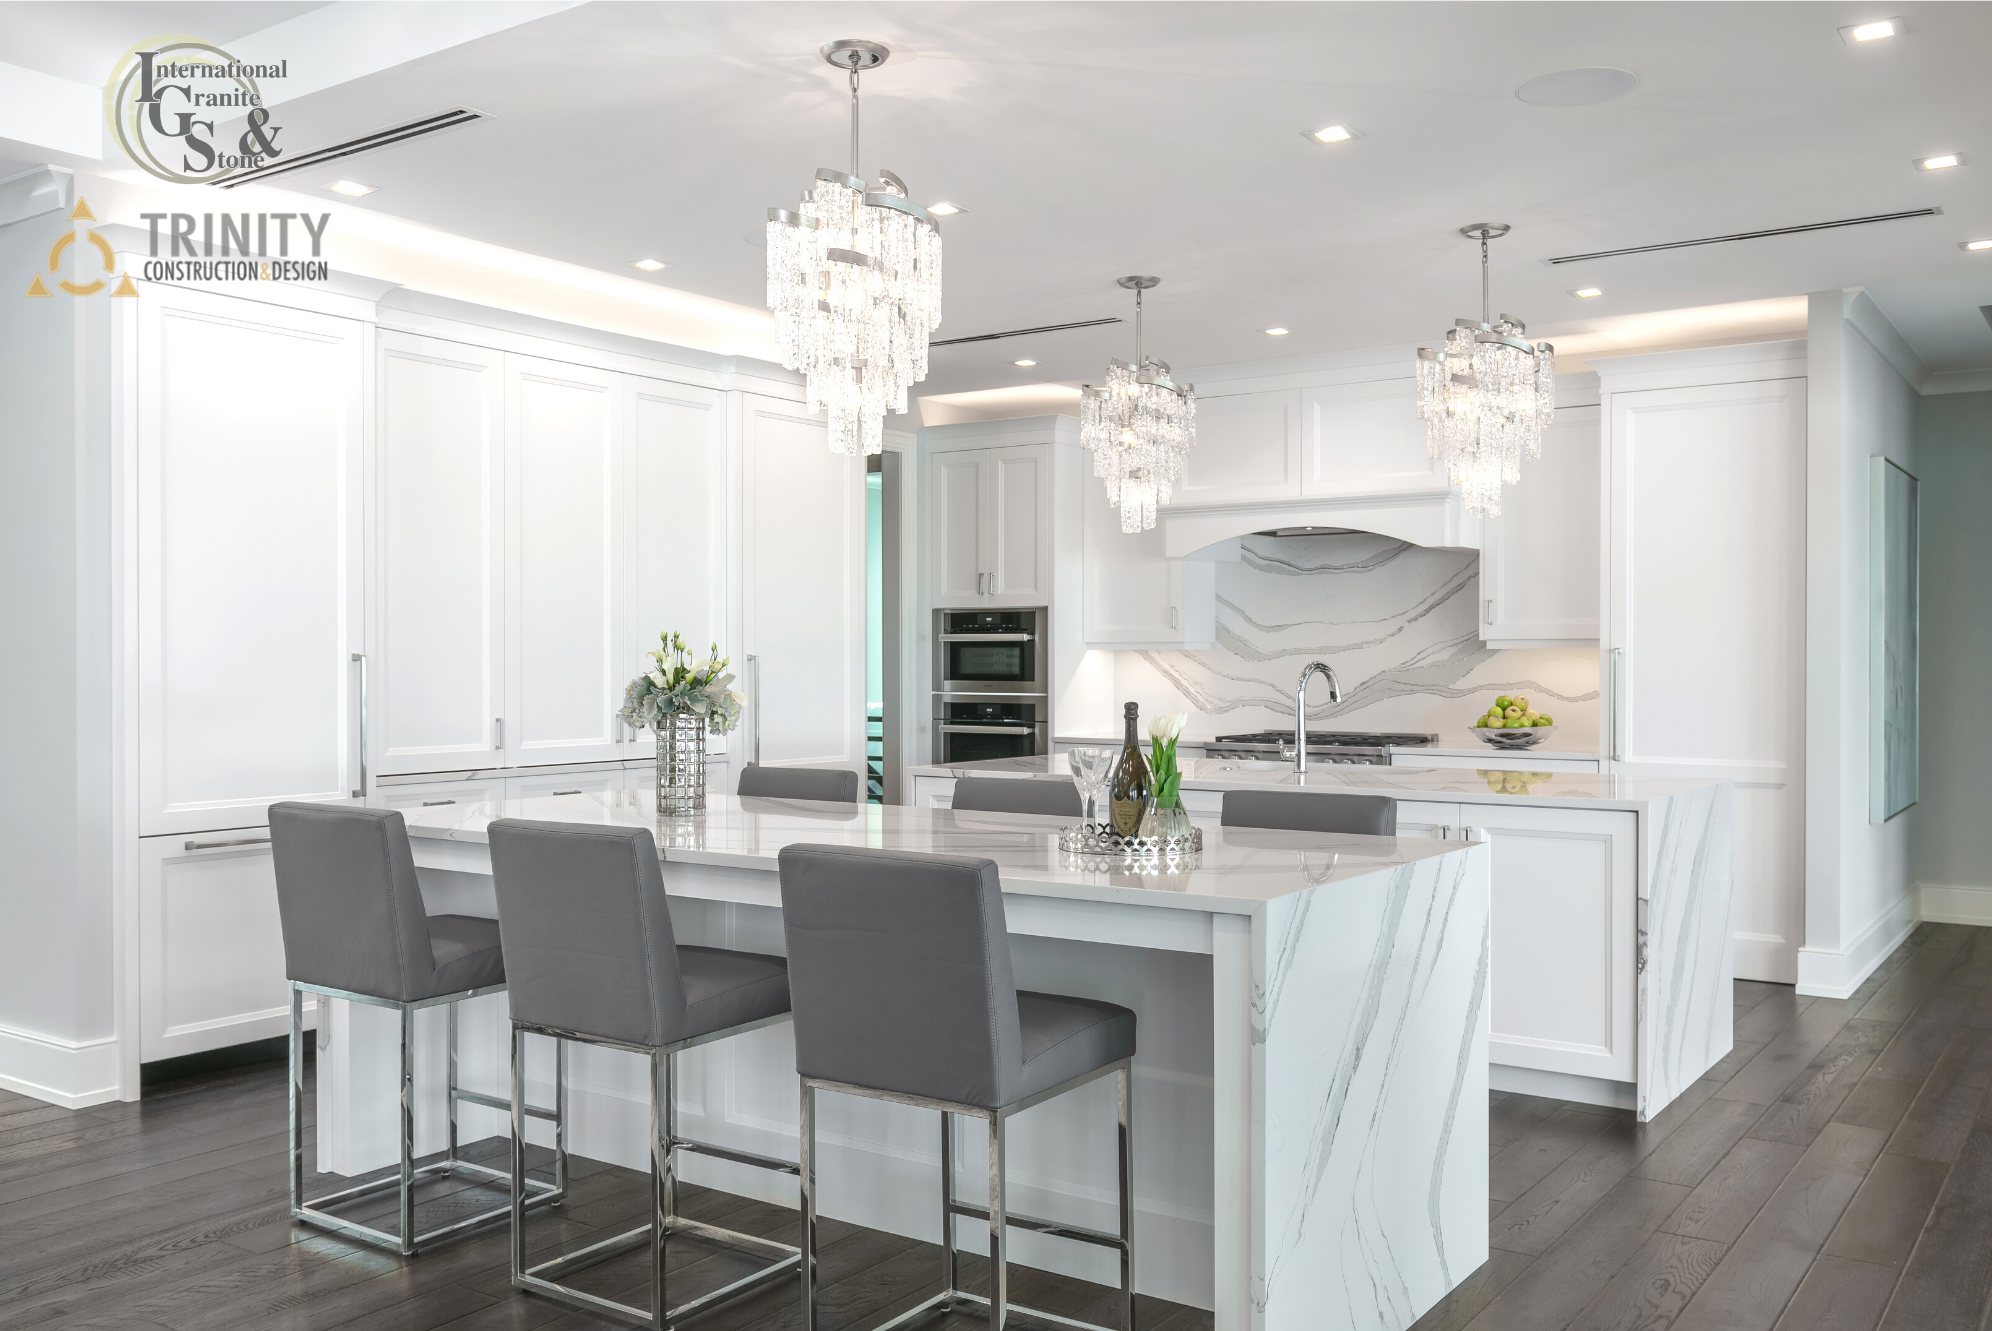 Cambria Brittanica Quartz Kitchen Countertops with Kitchen Island Waterfall with White Cabinets and Full Height Backsplash